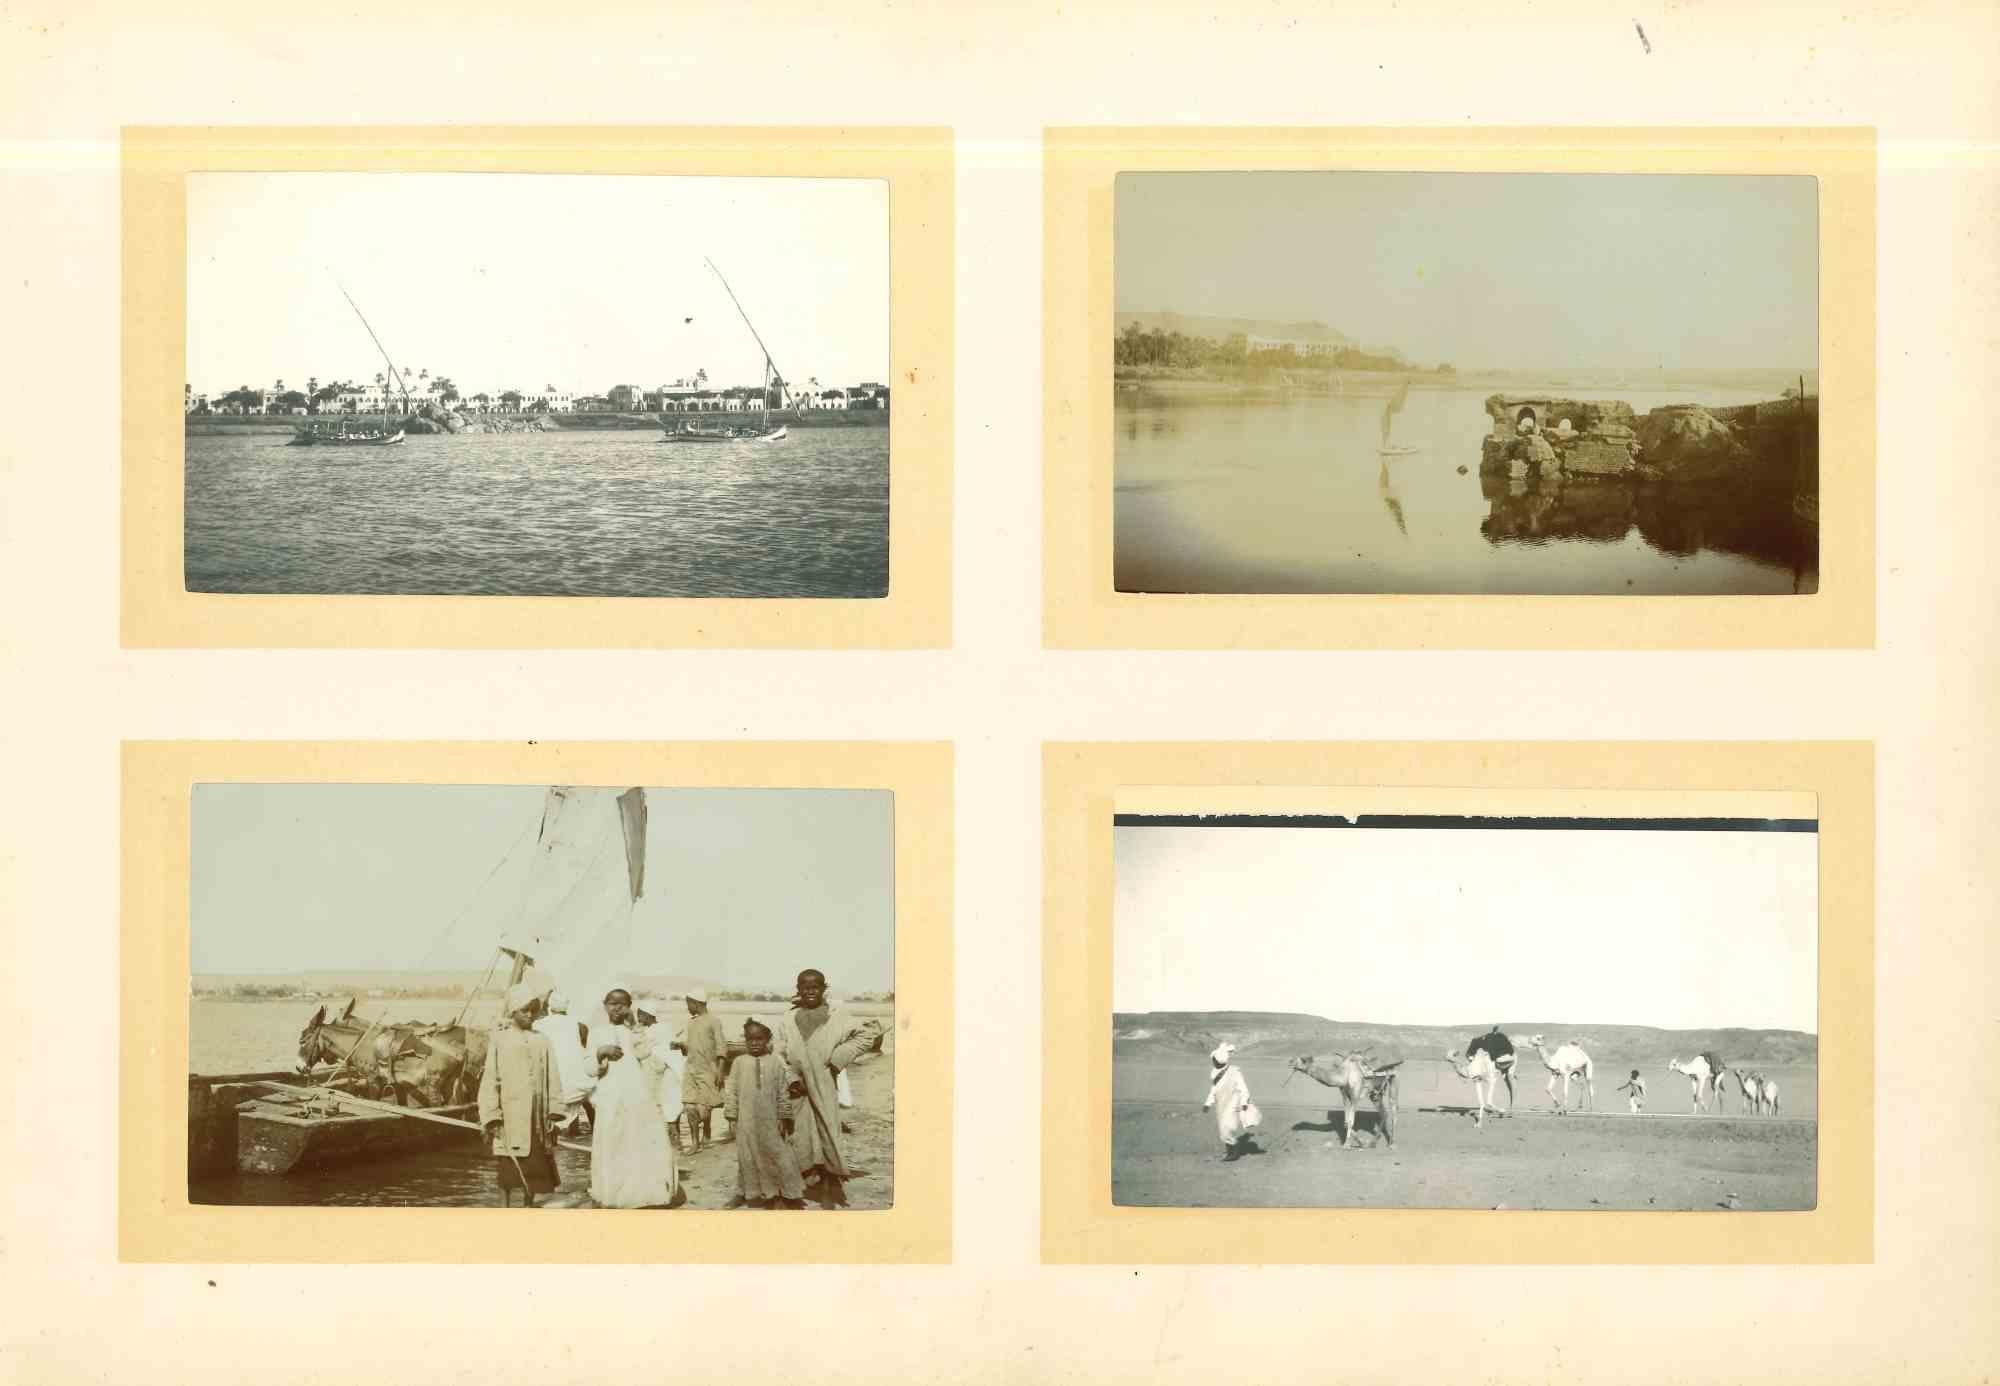 Landscape in Northern Africa - Vintage Photograph - Early 20th Century